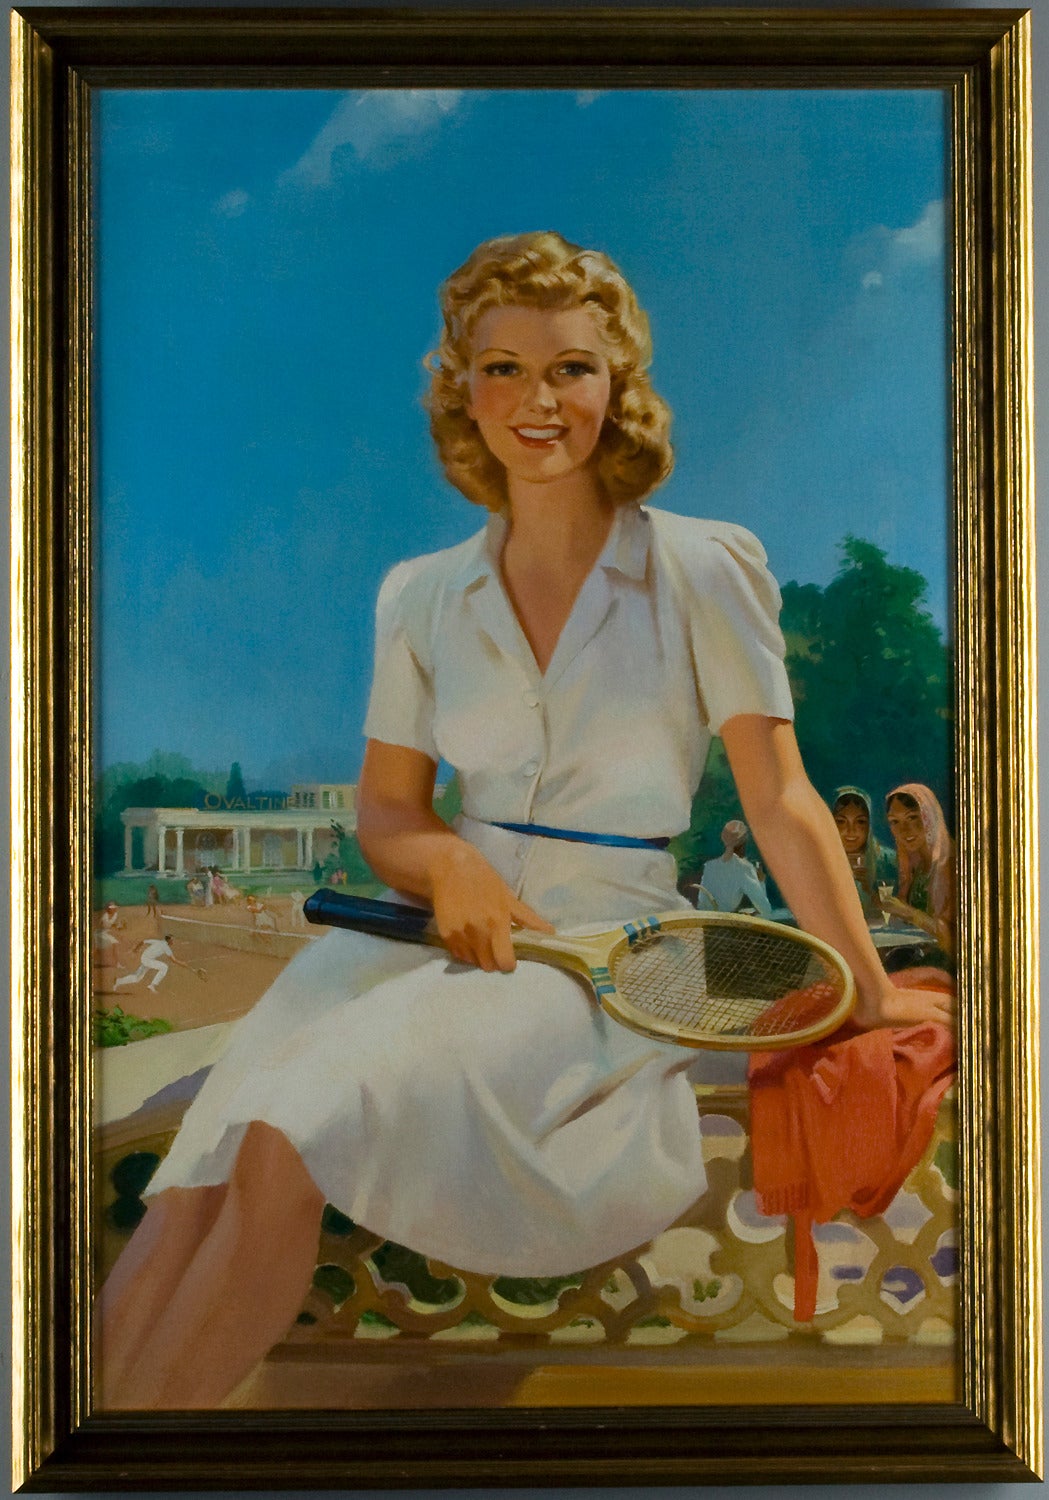 The Ovaltine Girl - Painting by Unknown